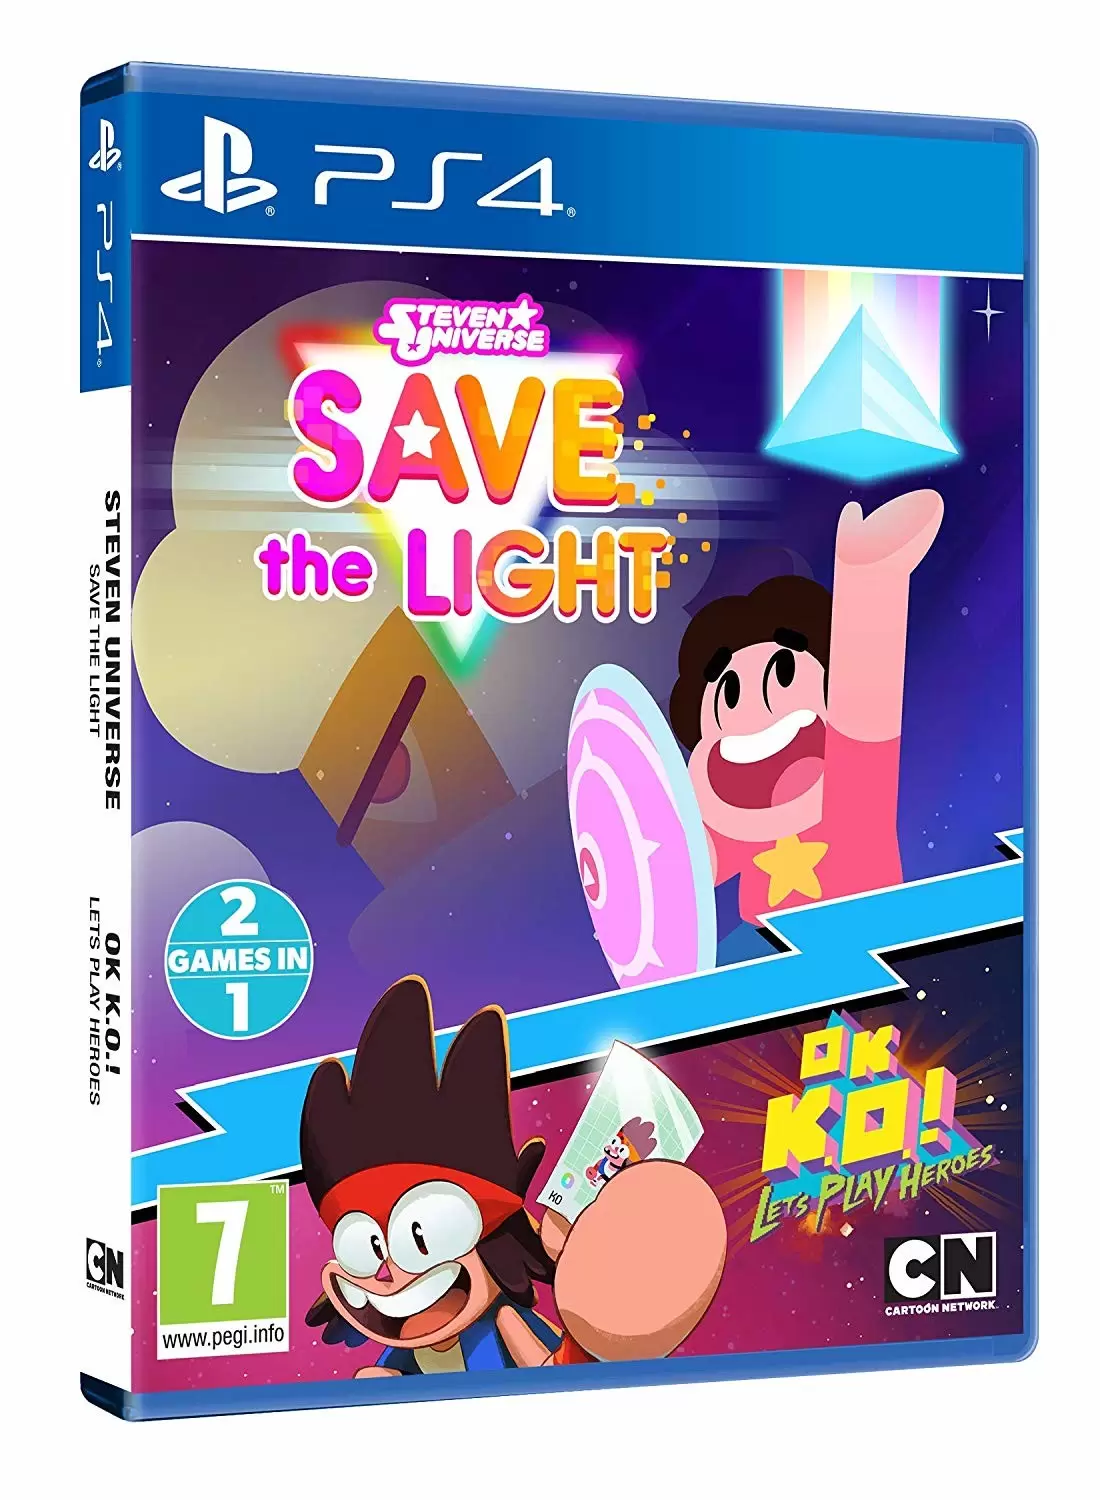 PS4 Games - Steven Universe : Save the Light + OK KO Let\'s Play Heroes